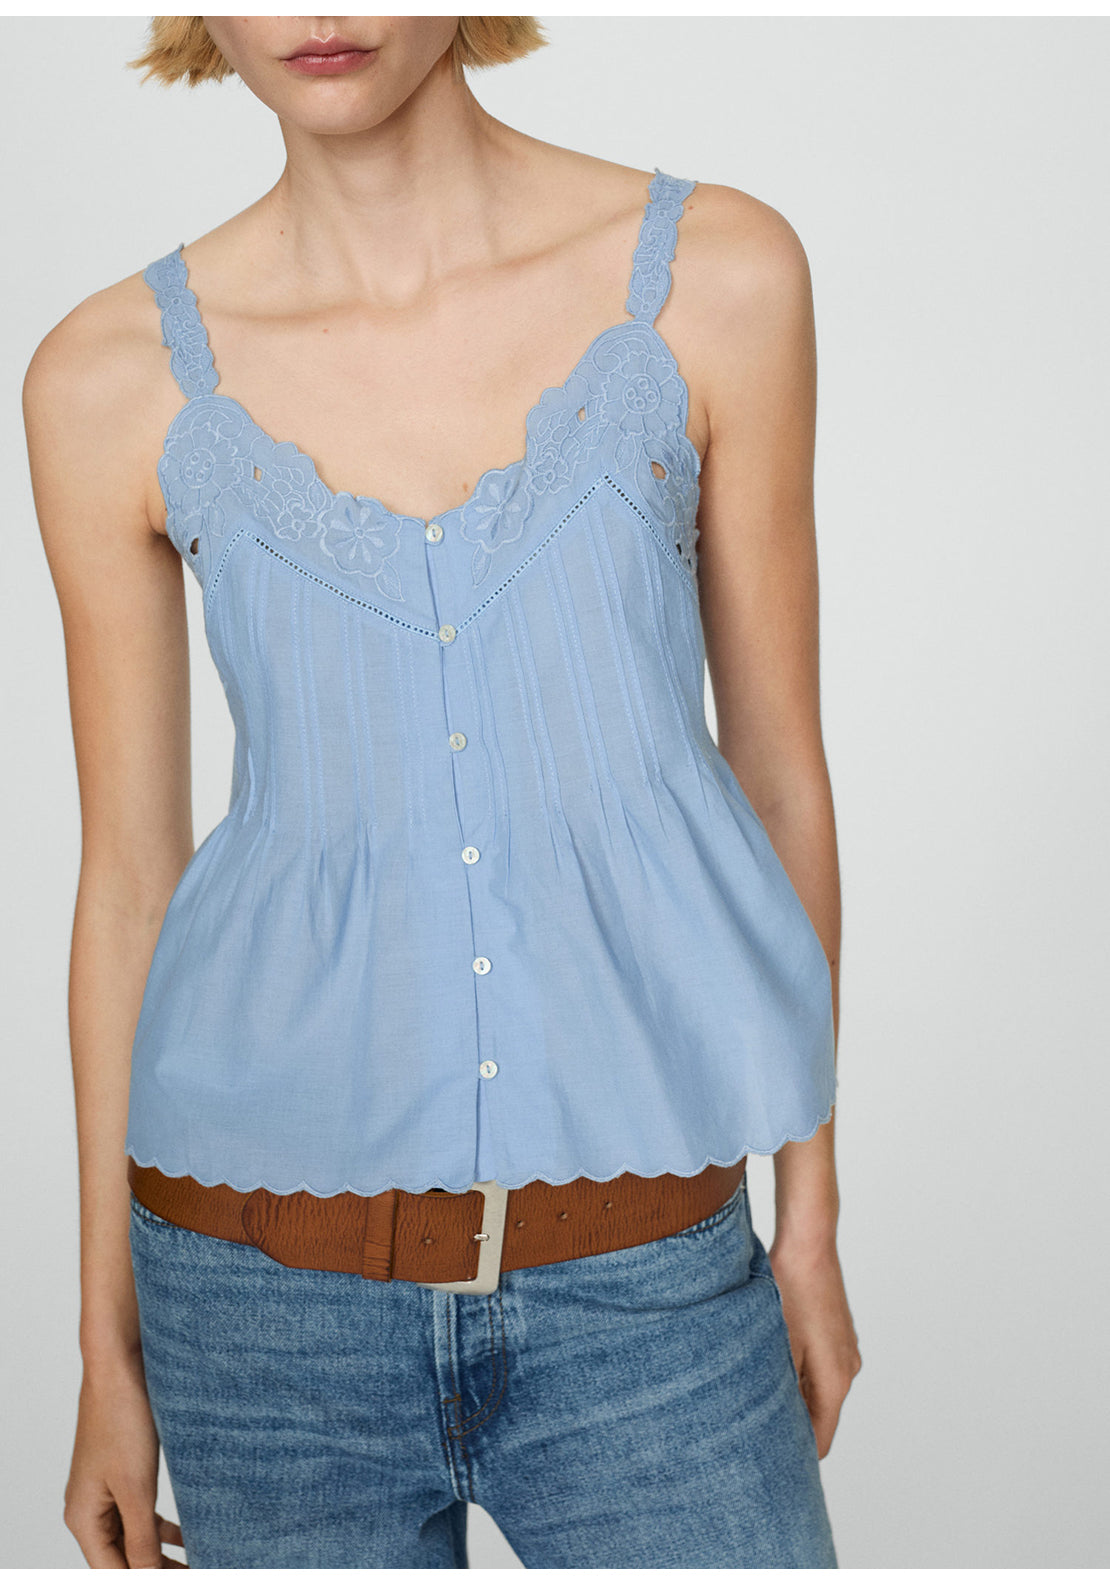 Mango Embroidered strap top 2 Shaws Department Stores